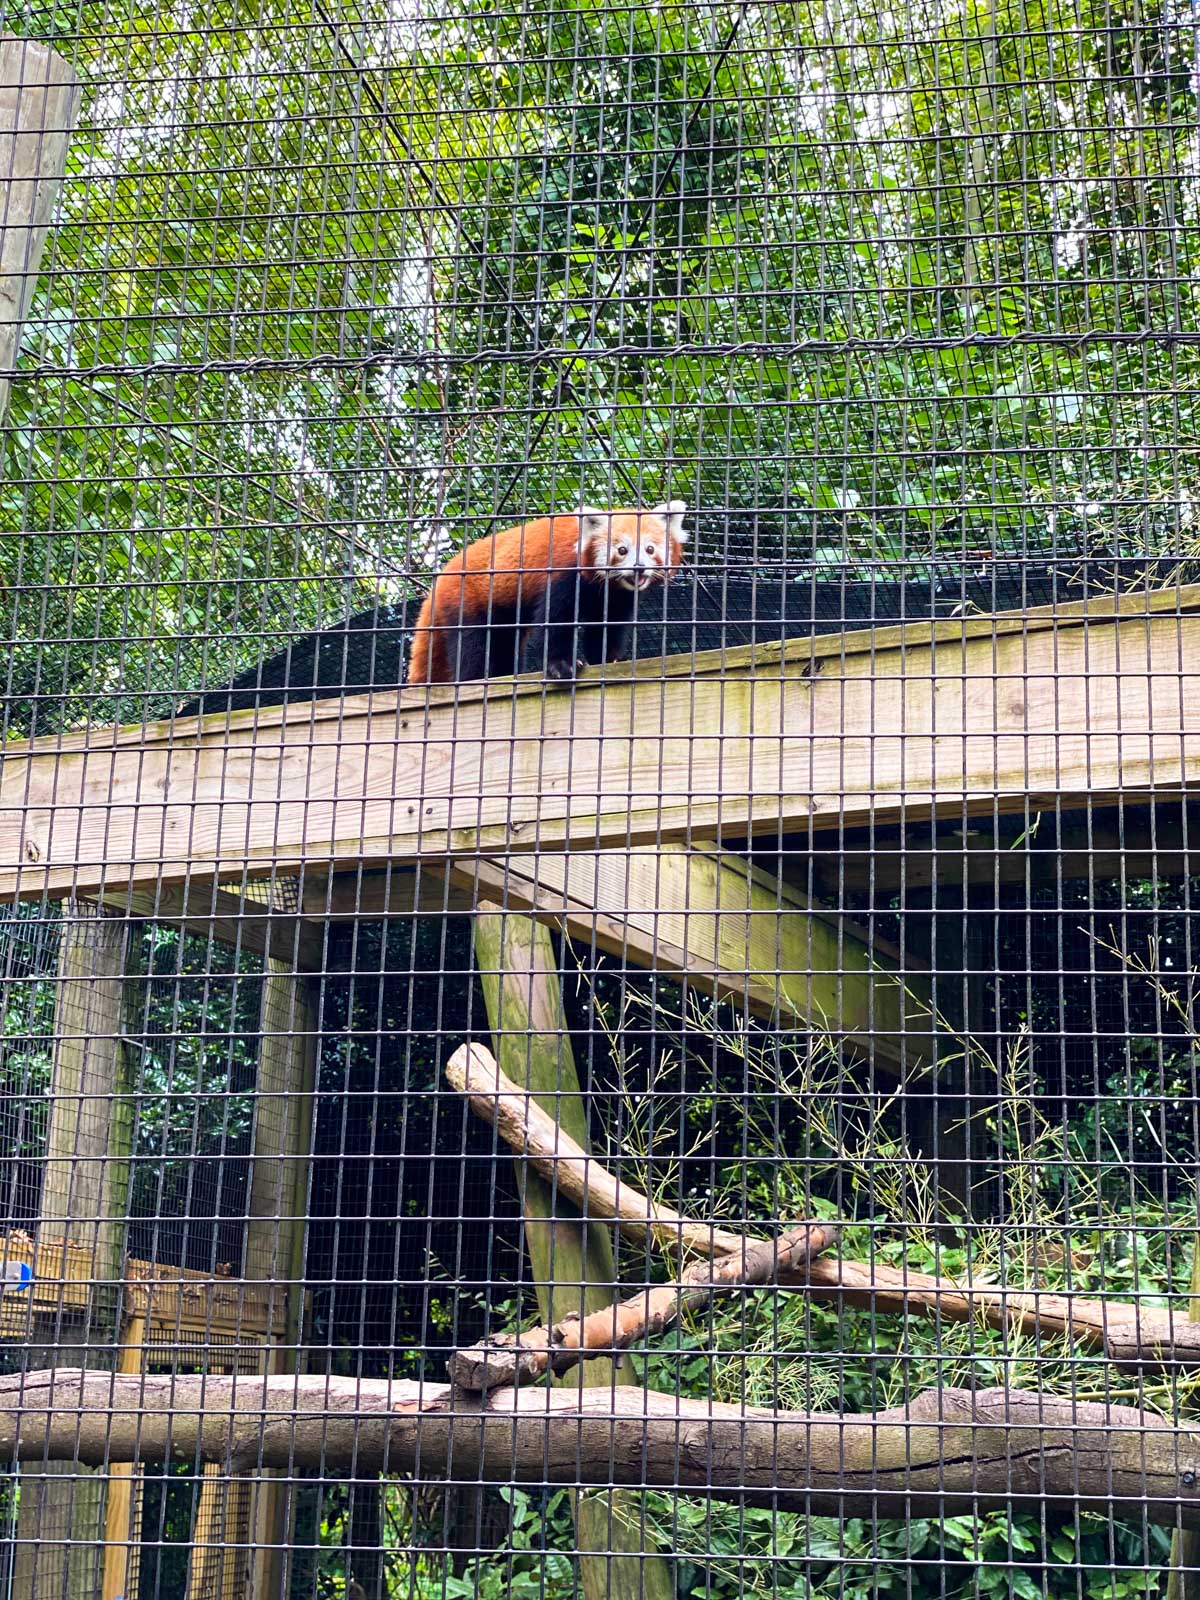 The red panda is a little farther away from the camera which gives him privacy.